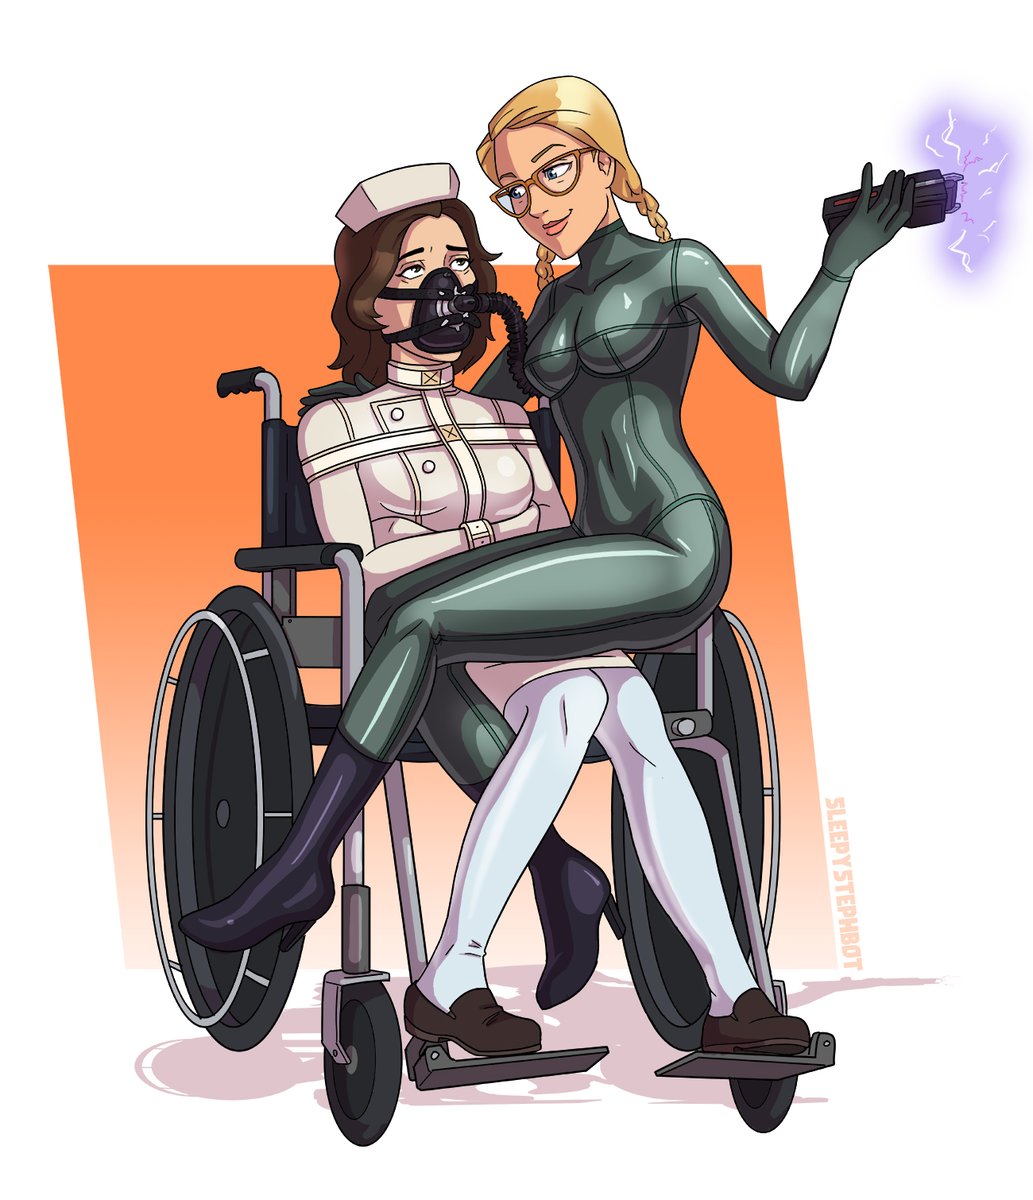 Sleepystephbot auf Twitter: "A commission for @DNProtag and 